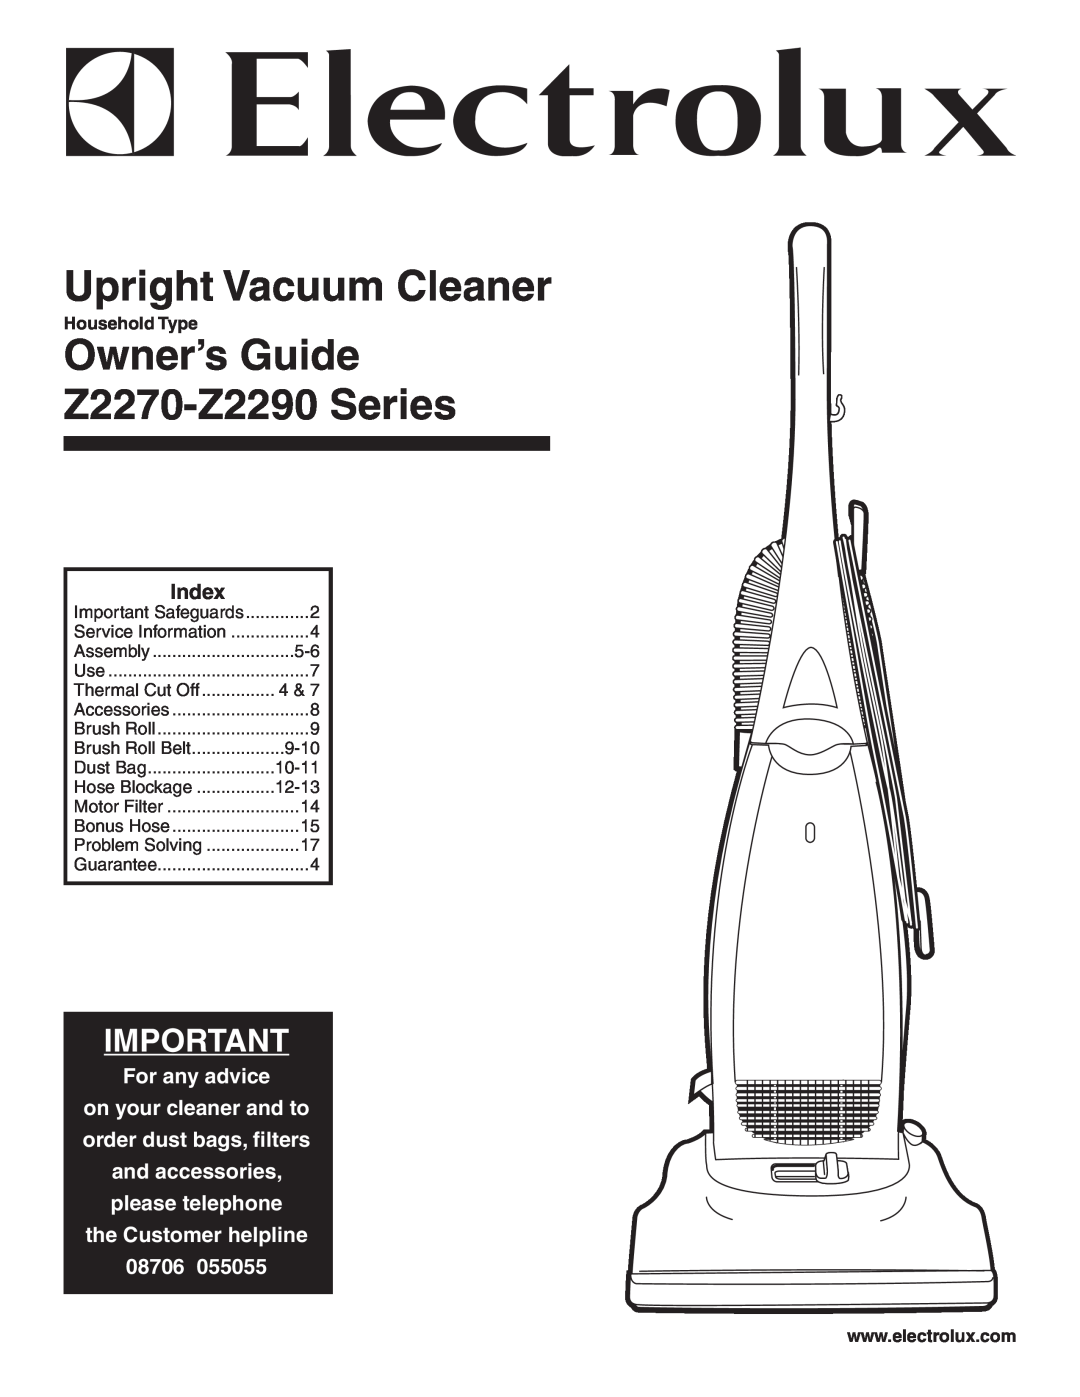 Electrolux manual Upright Vacuum Cleaner, Owner’s Guide Z2270-Z2290 Series, Index, For any advice, Thermal Cut Off 